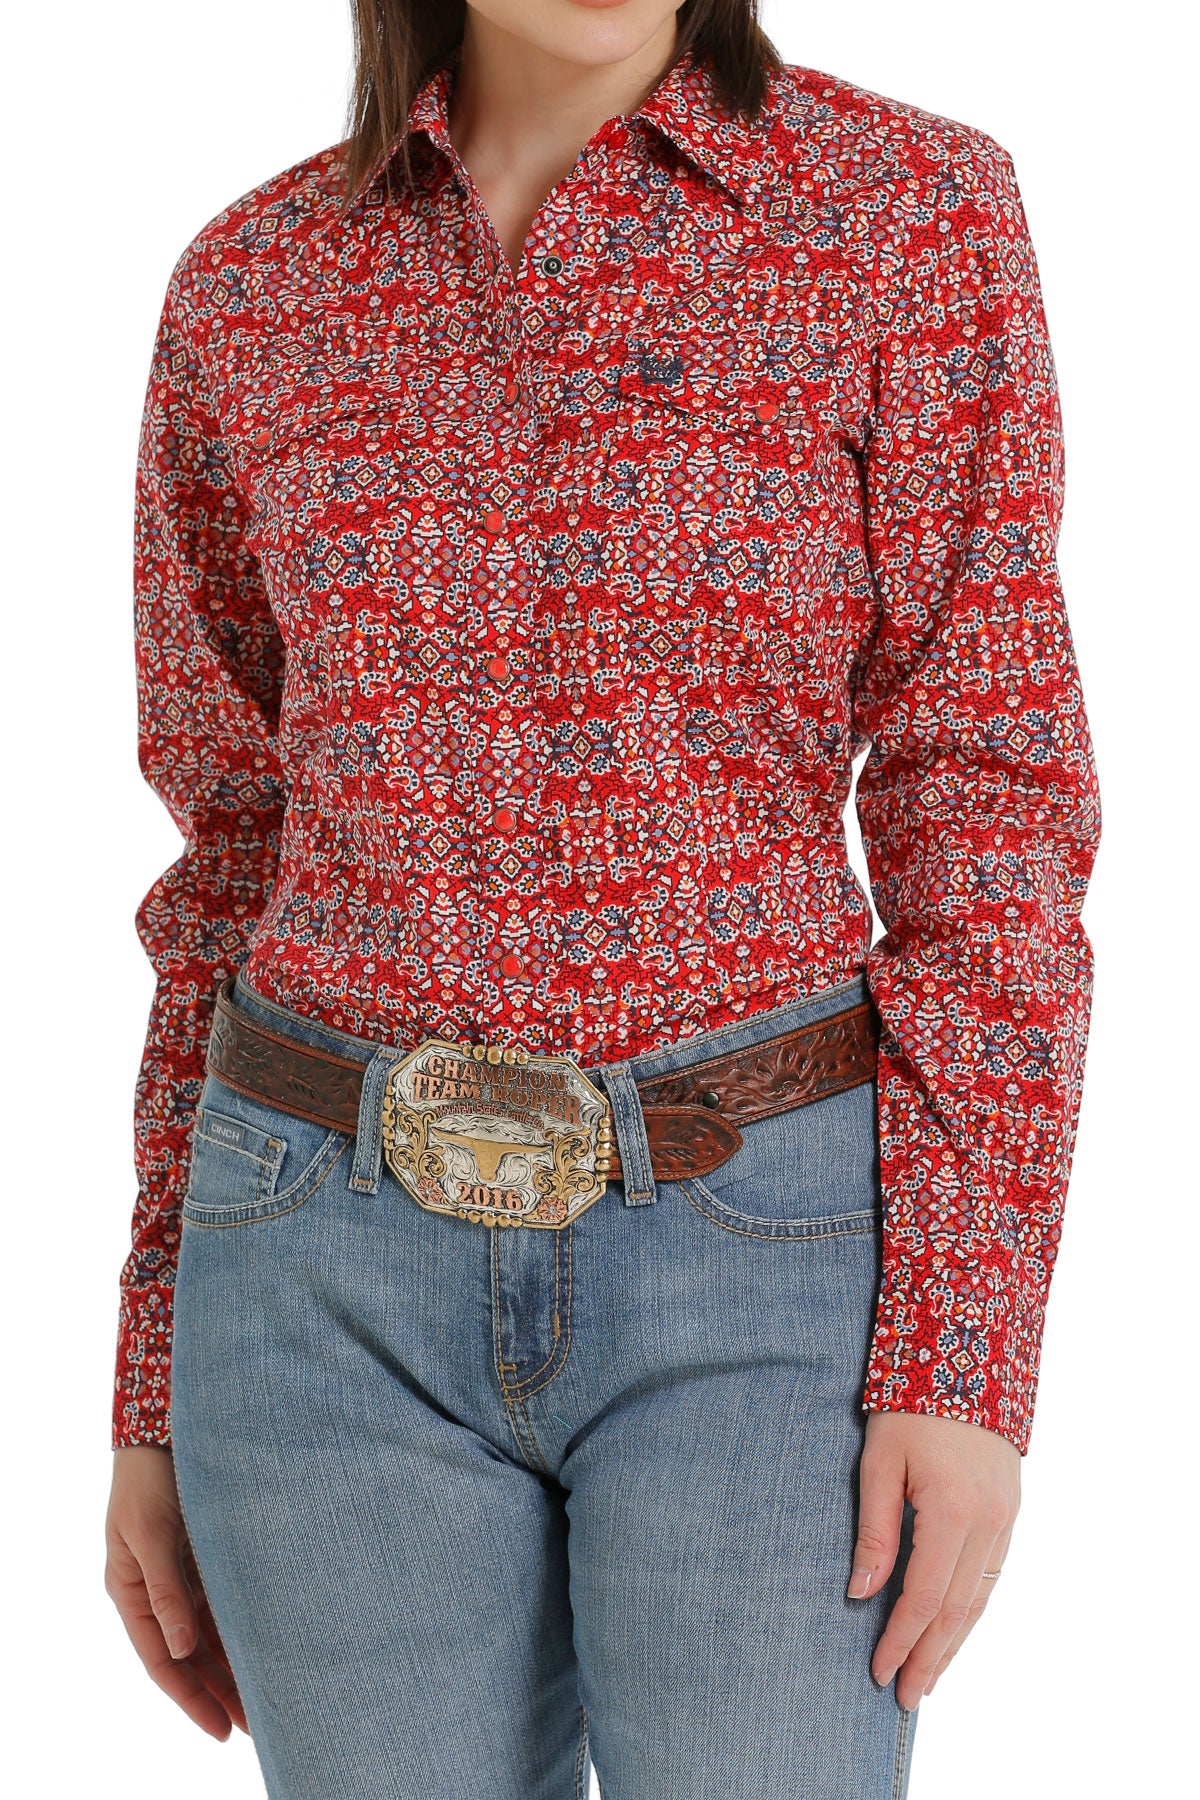 CINCH Women's Red and Blue Snap Front Western Shirt